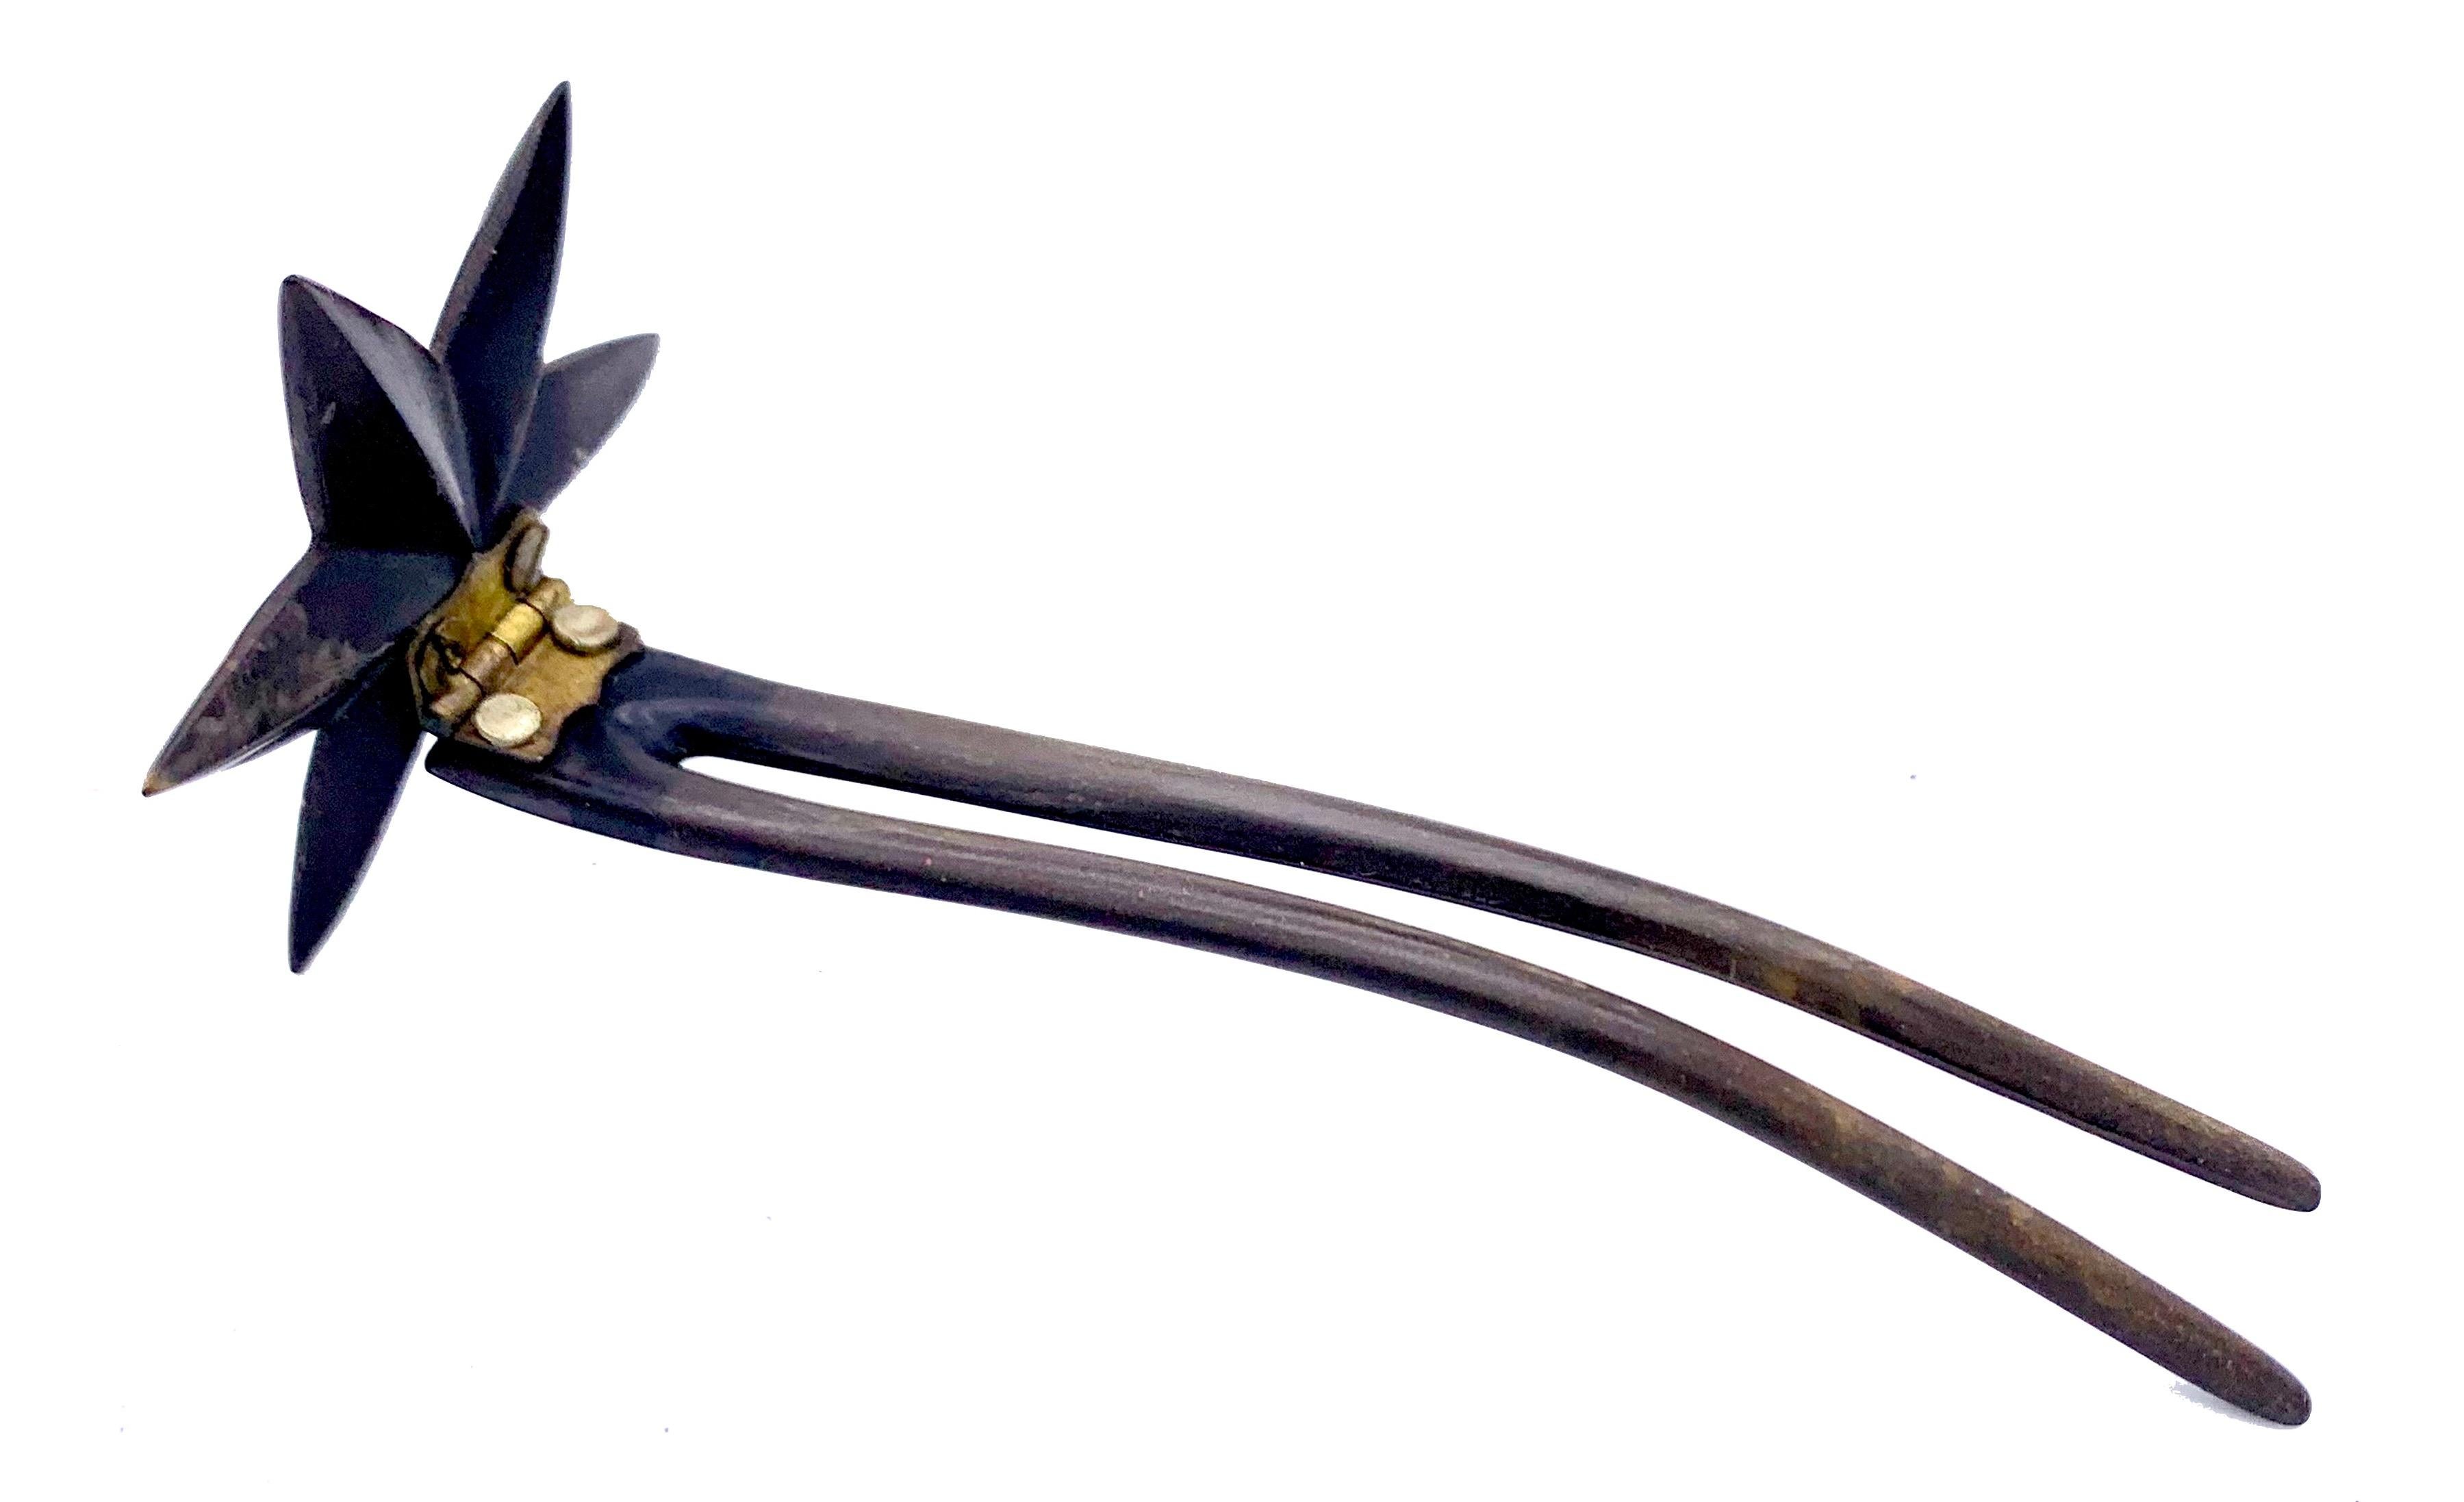 A vulcanite star is mounted onto a hair pin in made from the same material.
Vulcanite, also called gutta percha was made from rubber. 